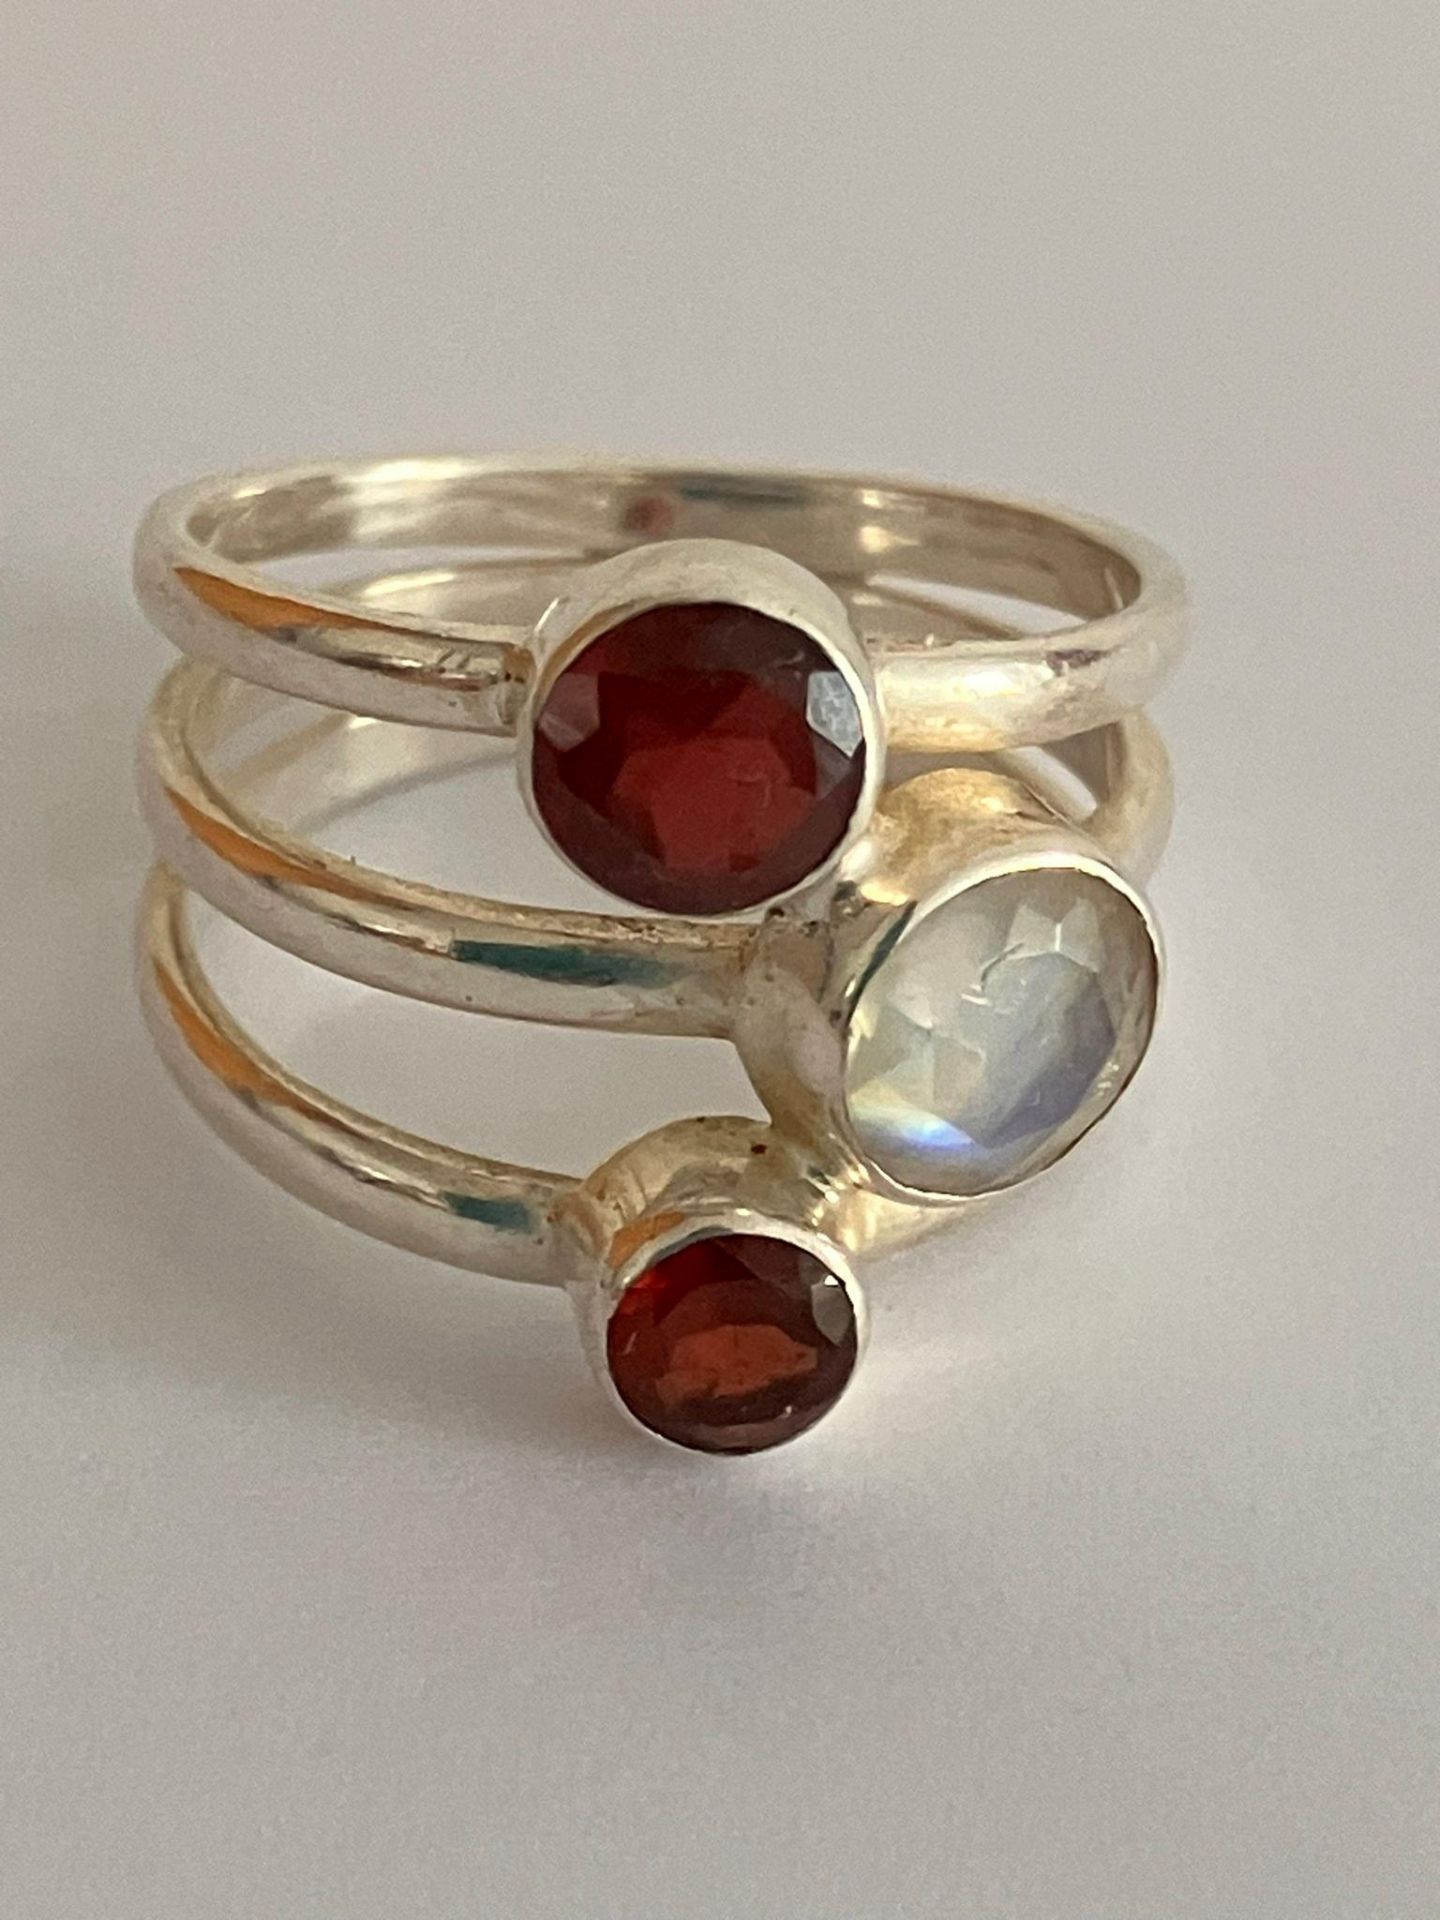 Vintage SILVER RING with ‘triple band’ design. Set with GARNETS and MOONSTONE.Full UK Hallmark.